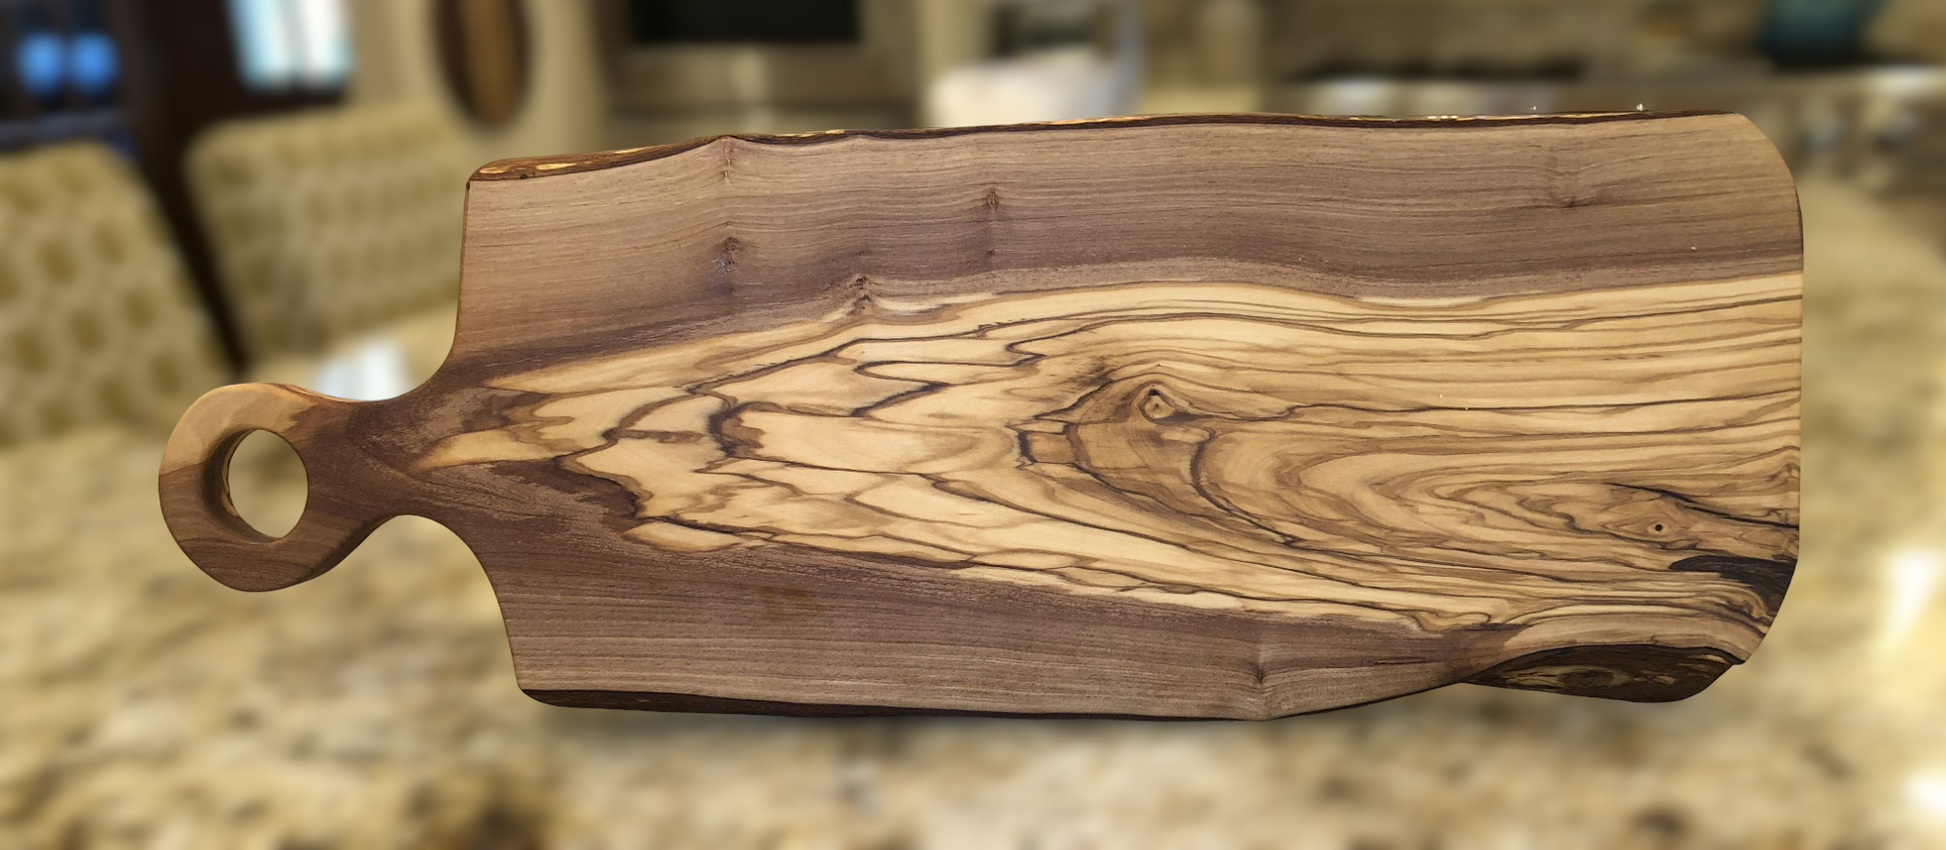 Italian Olive Wood Cheese Board Premium Olive Wood Bread Cutting  Charcuterie Serving Carving Chopping Cheeseboard Sustainable 